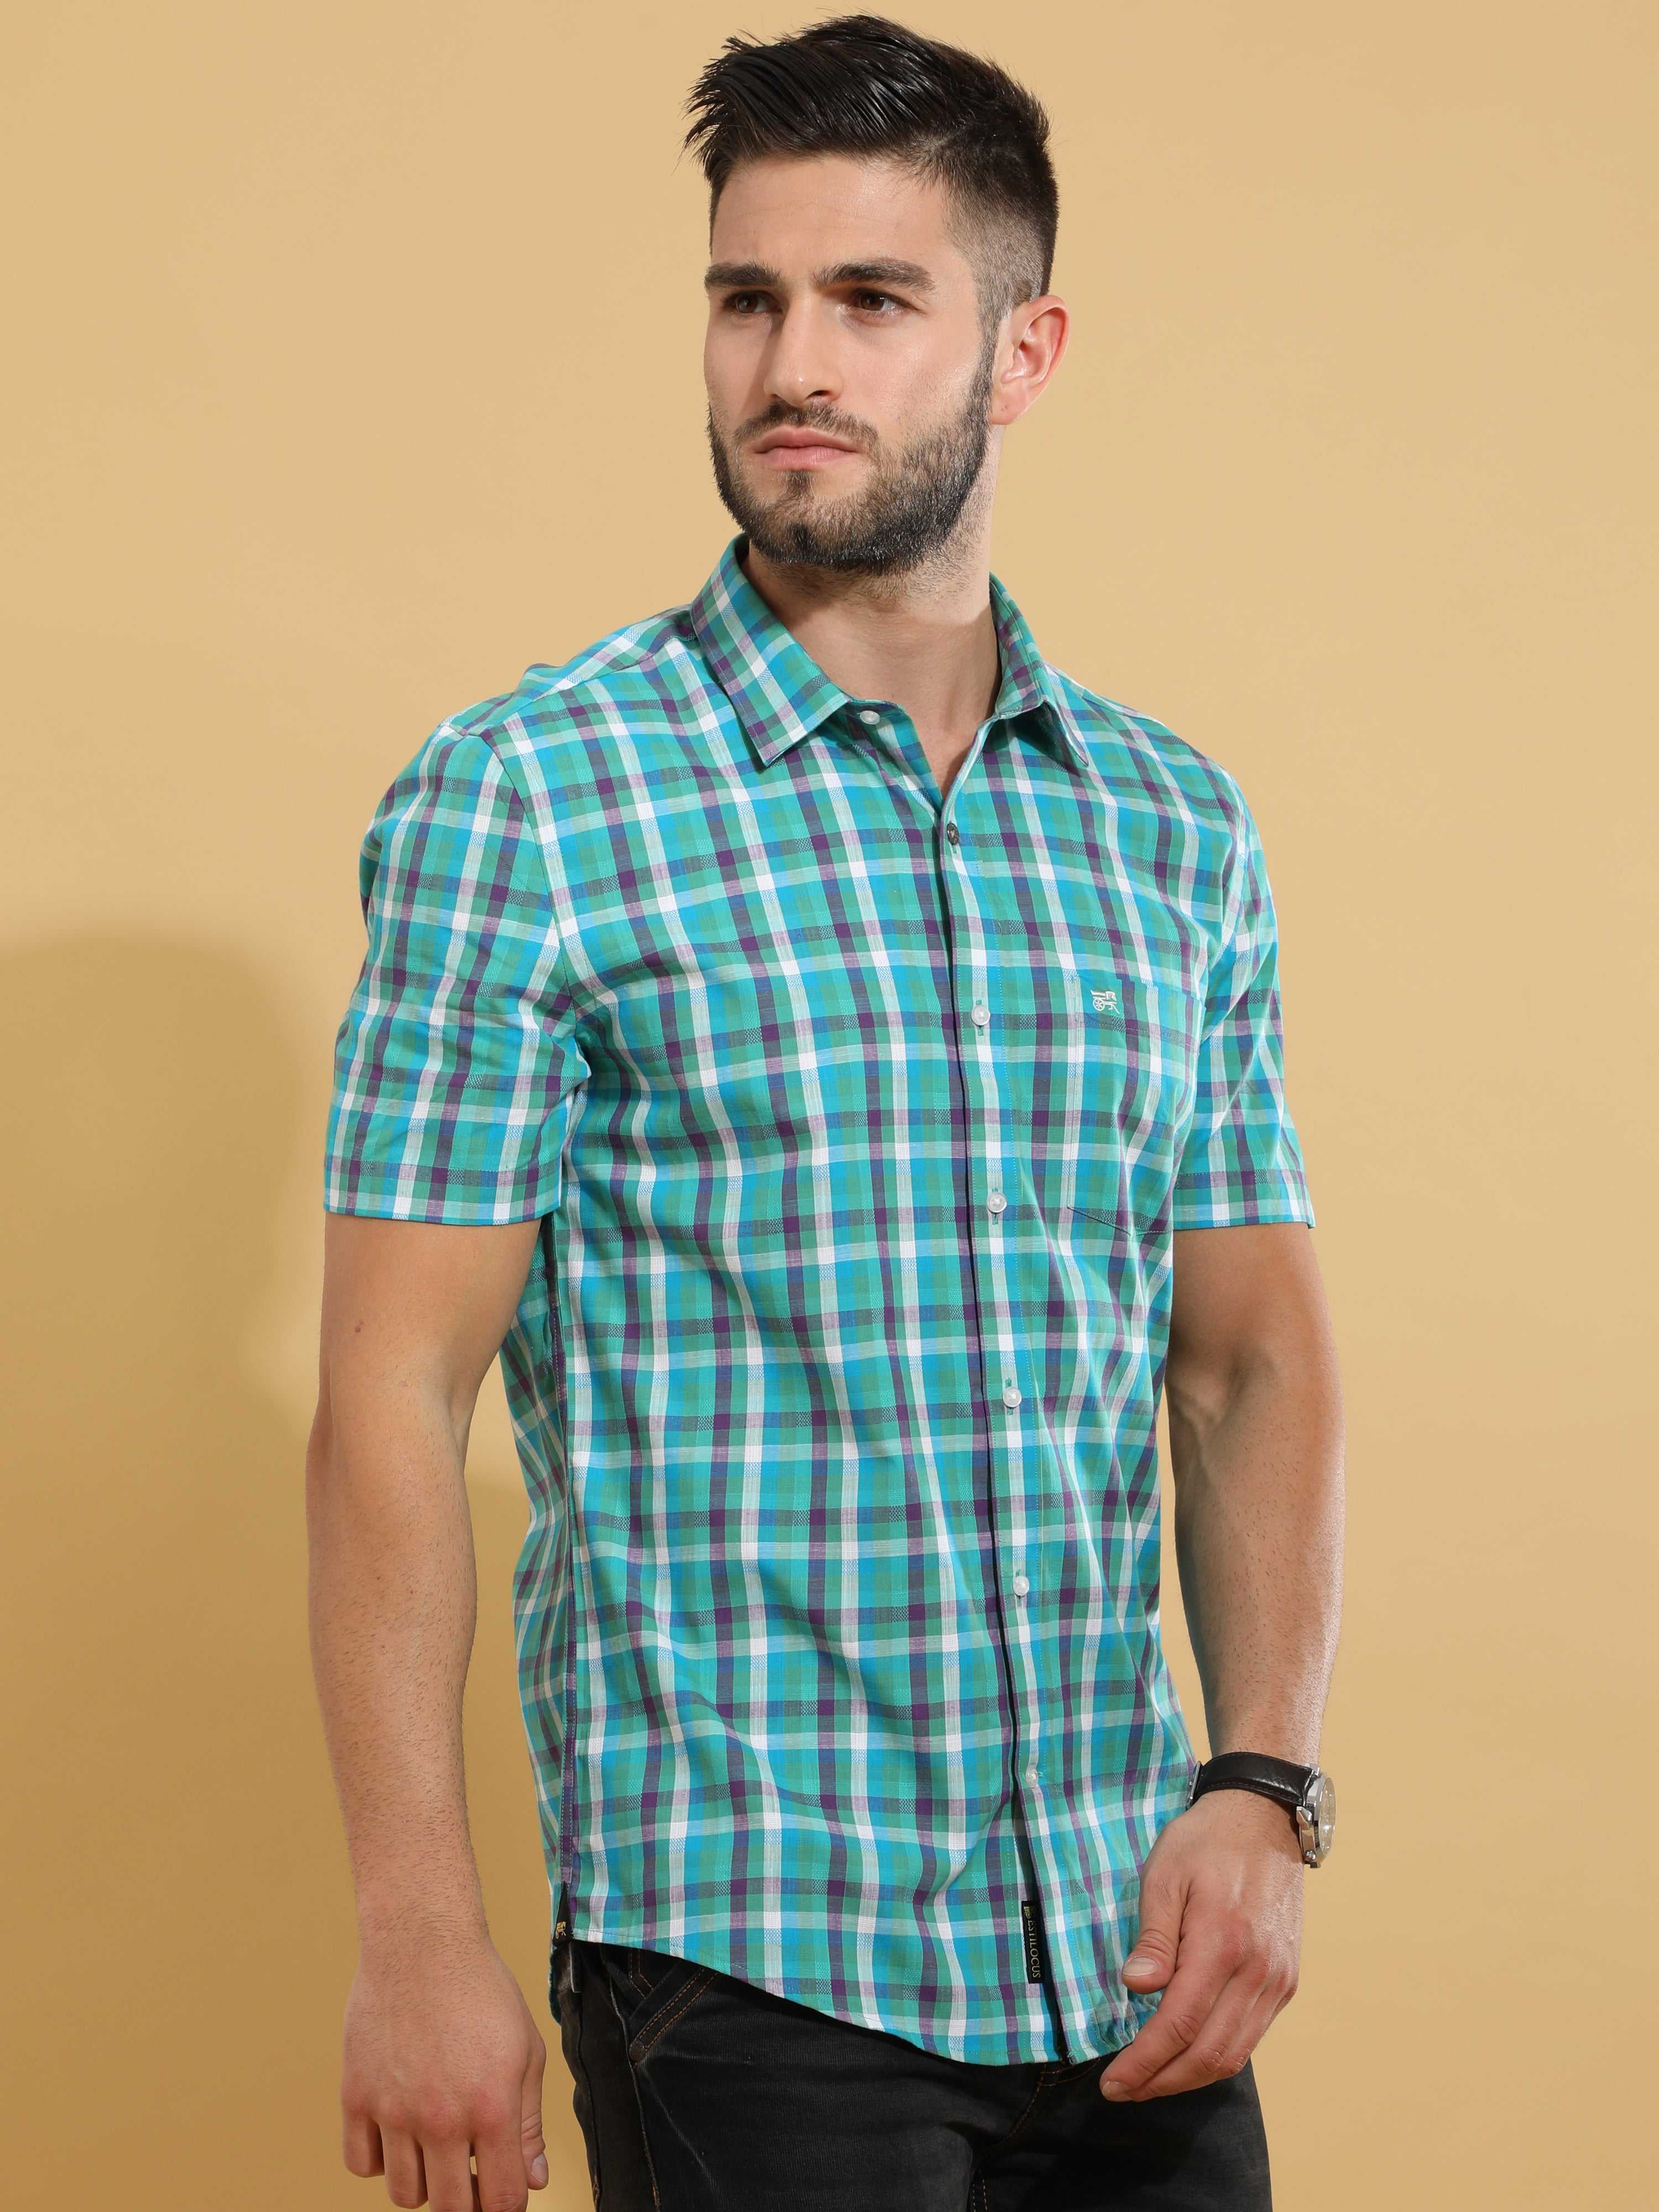 Green Checks Semi Casual Shirt shop online at Estilocus. DETAILS & CARE This pure cotton checked shirt is a stylish go-to for laidback days. Cut in a comfy regular fit, with a classic button-down front and chest pocket. 100% premium cotton full sleeve che